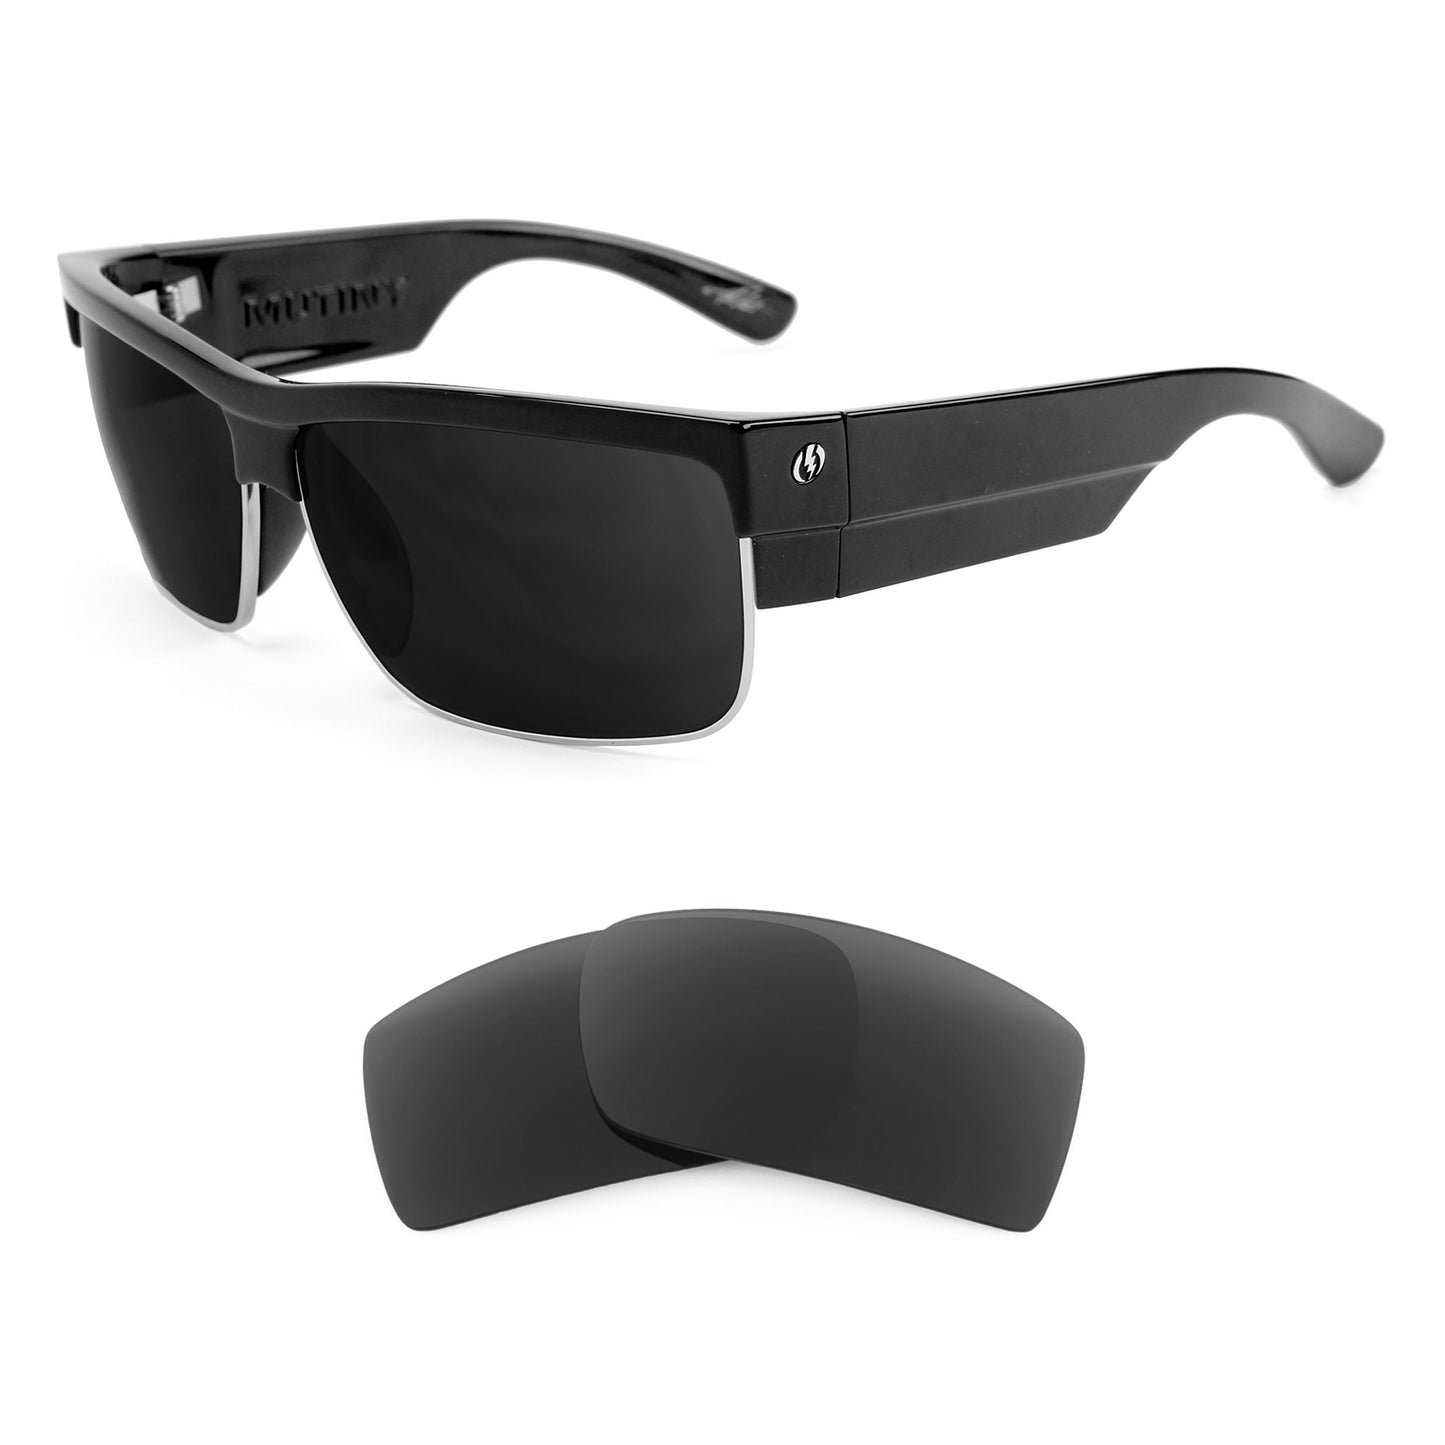 Electric Mutiny sunglasses with replacement lenses